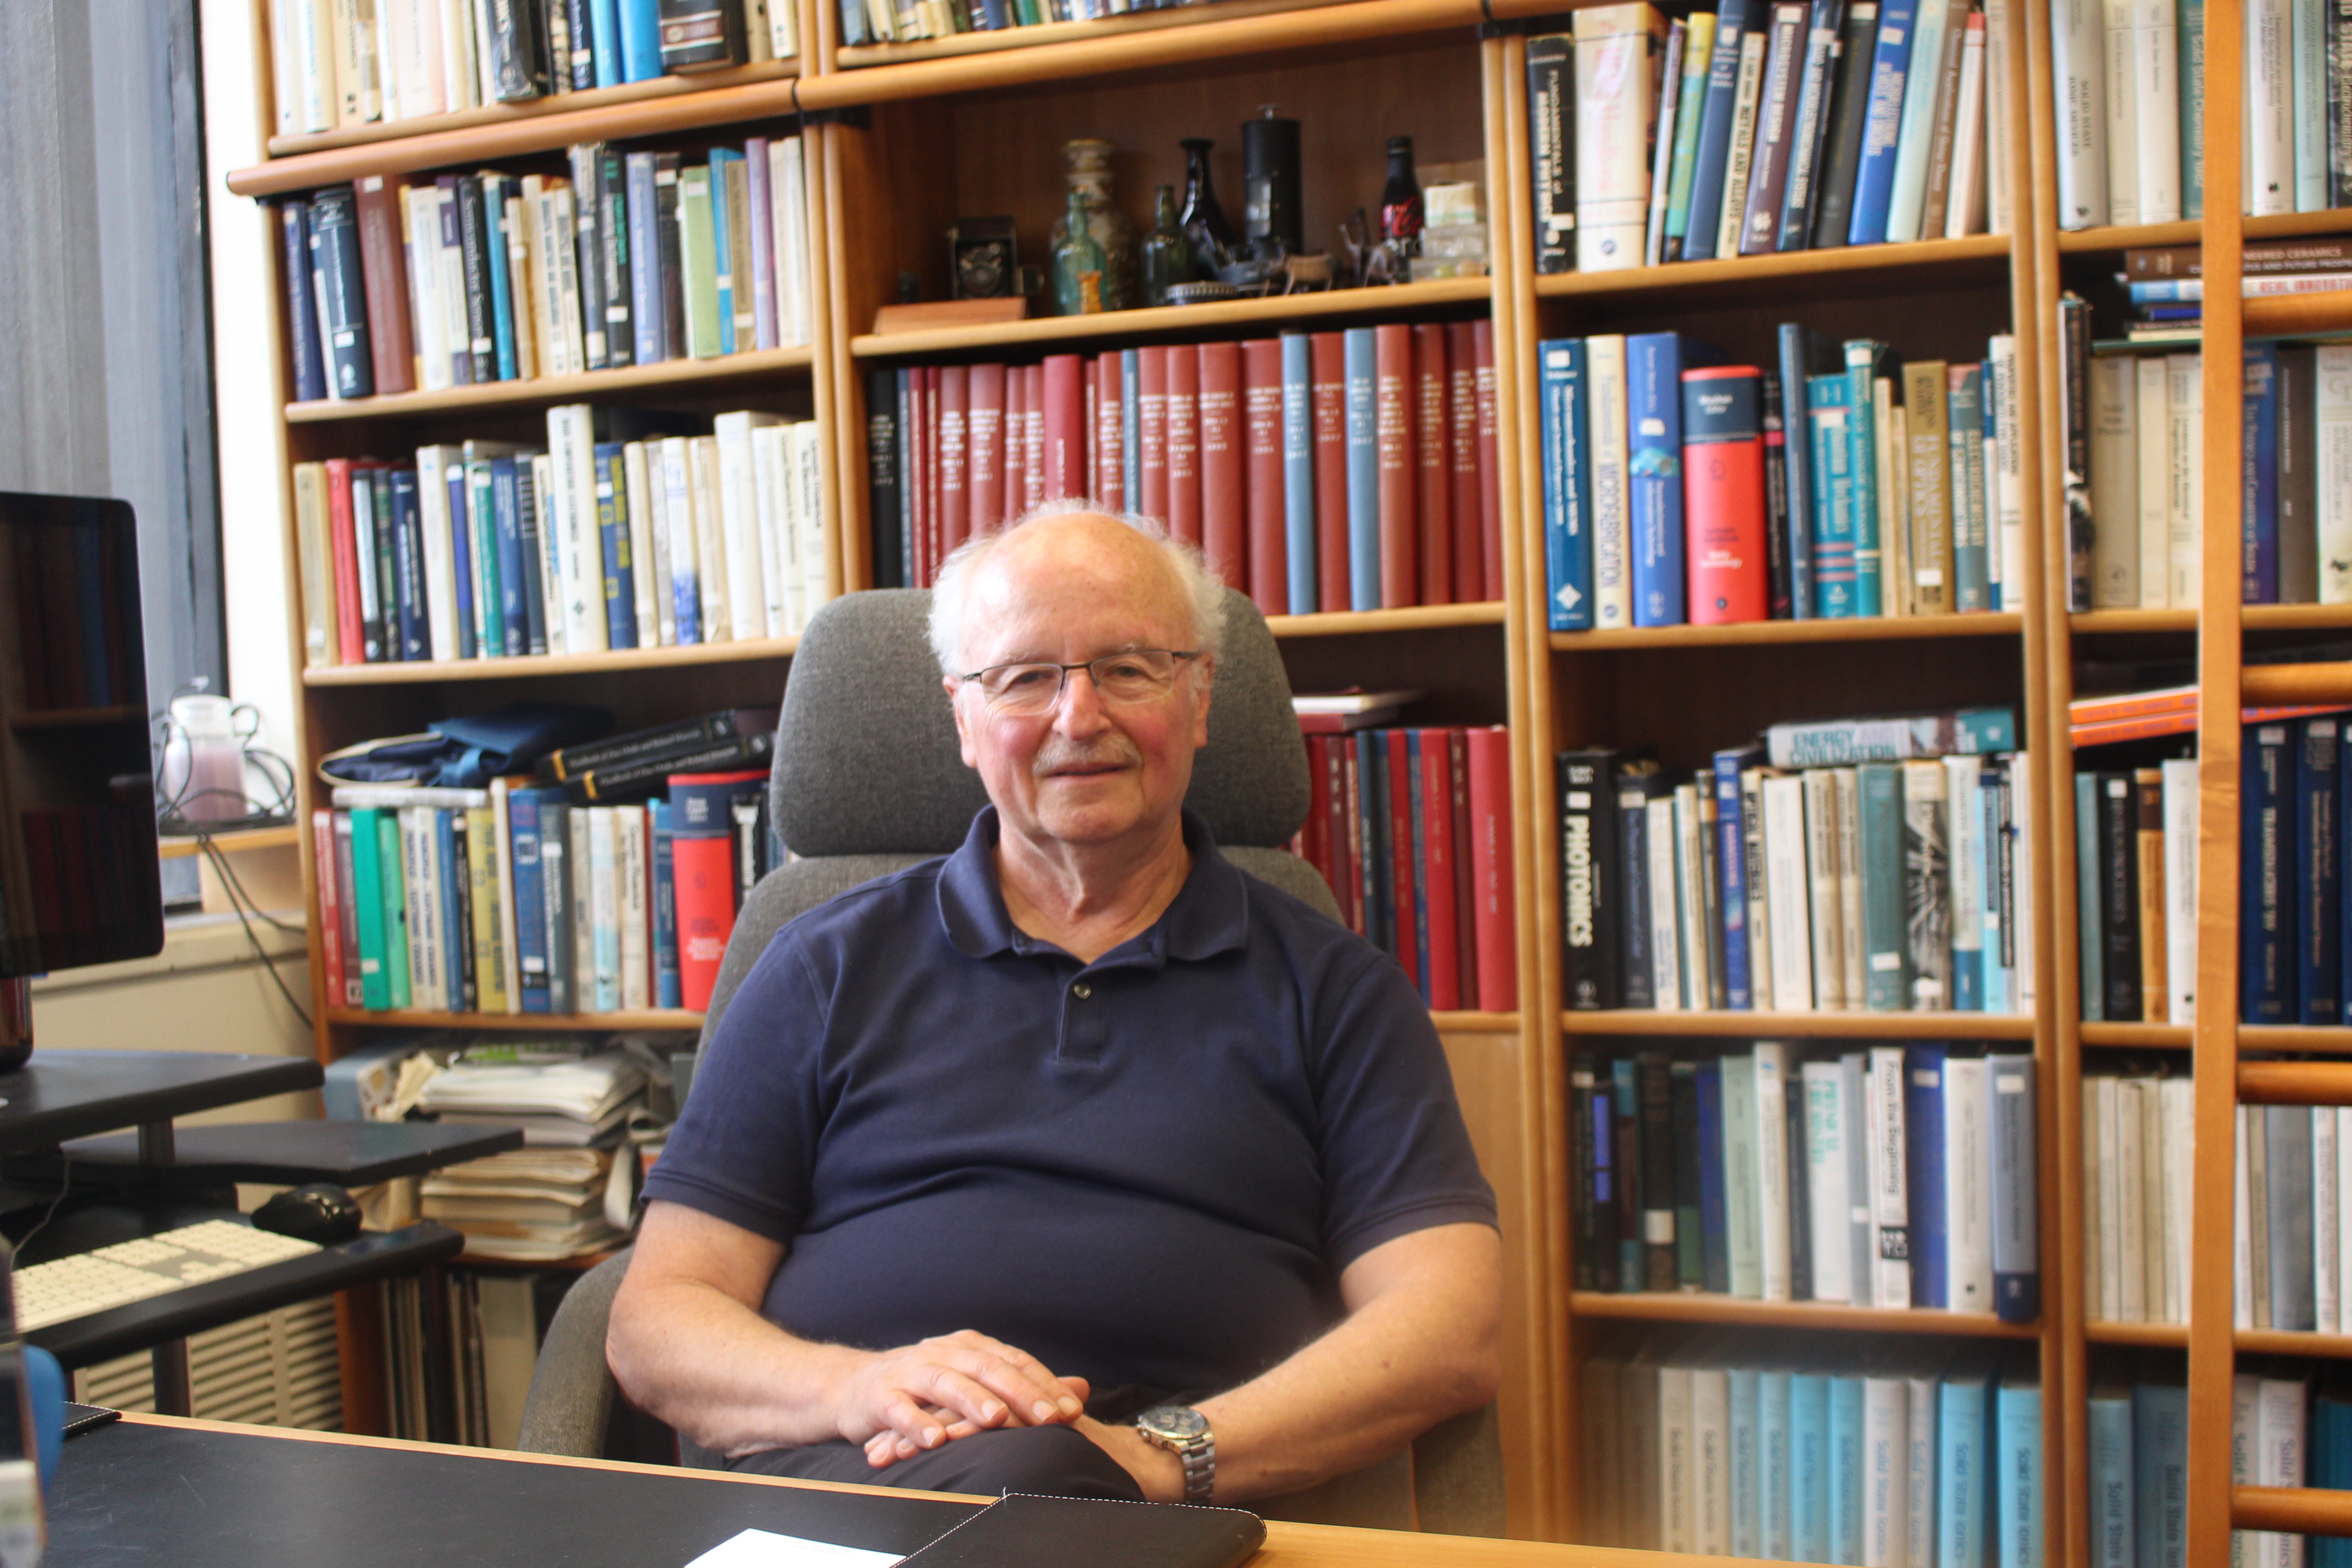 Harry Tuller honored for career advancing solid-state chemistry and electrochemistry